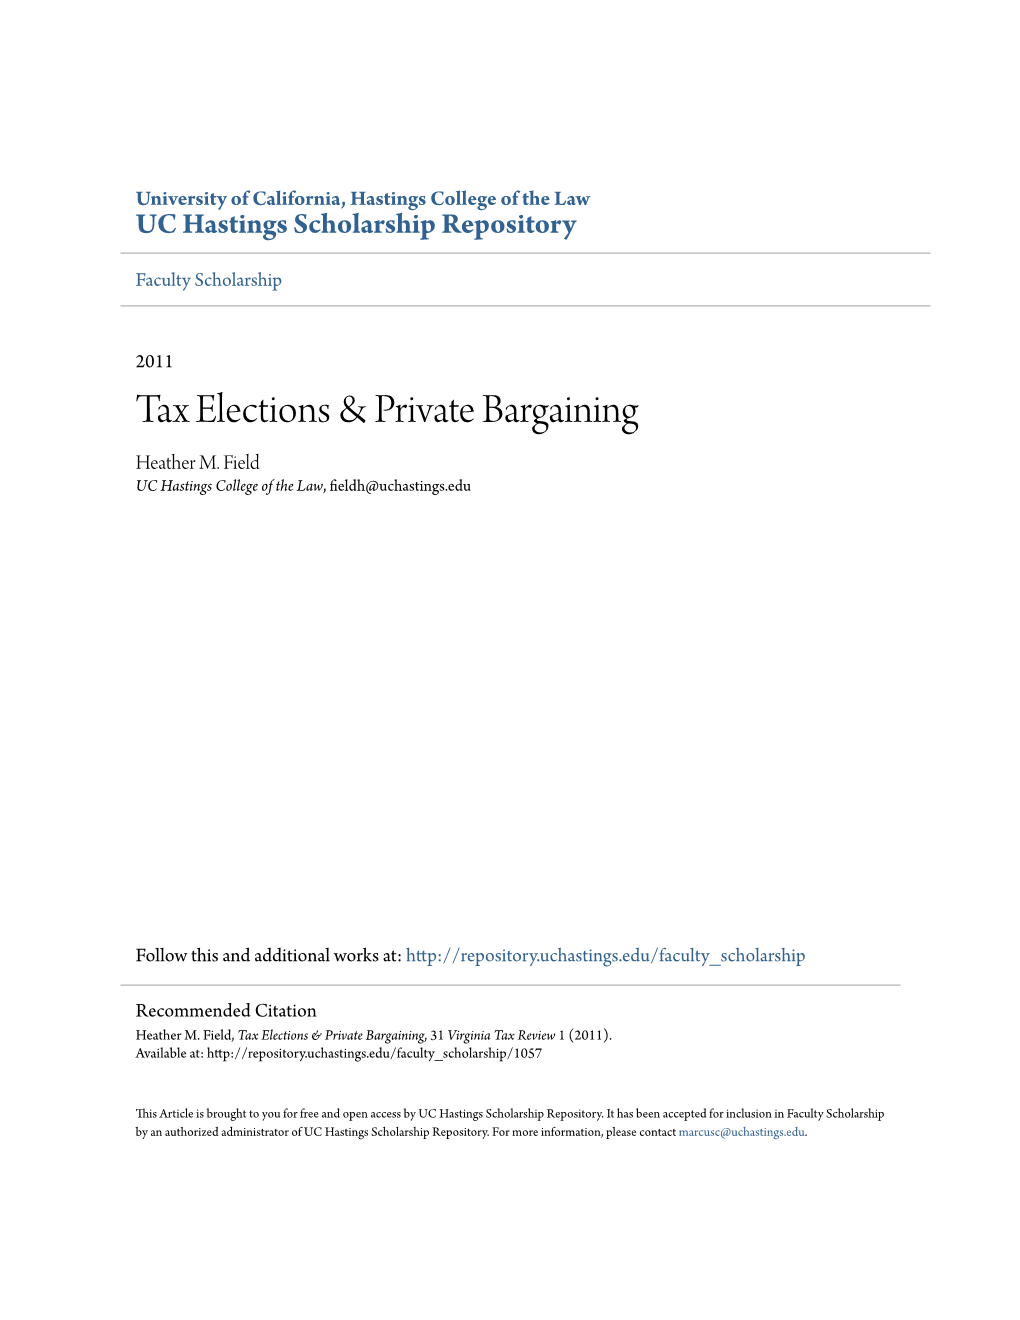 Tax Elections & Private Bargaining